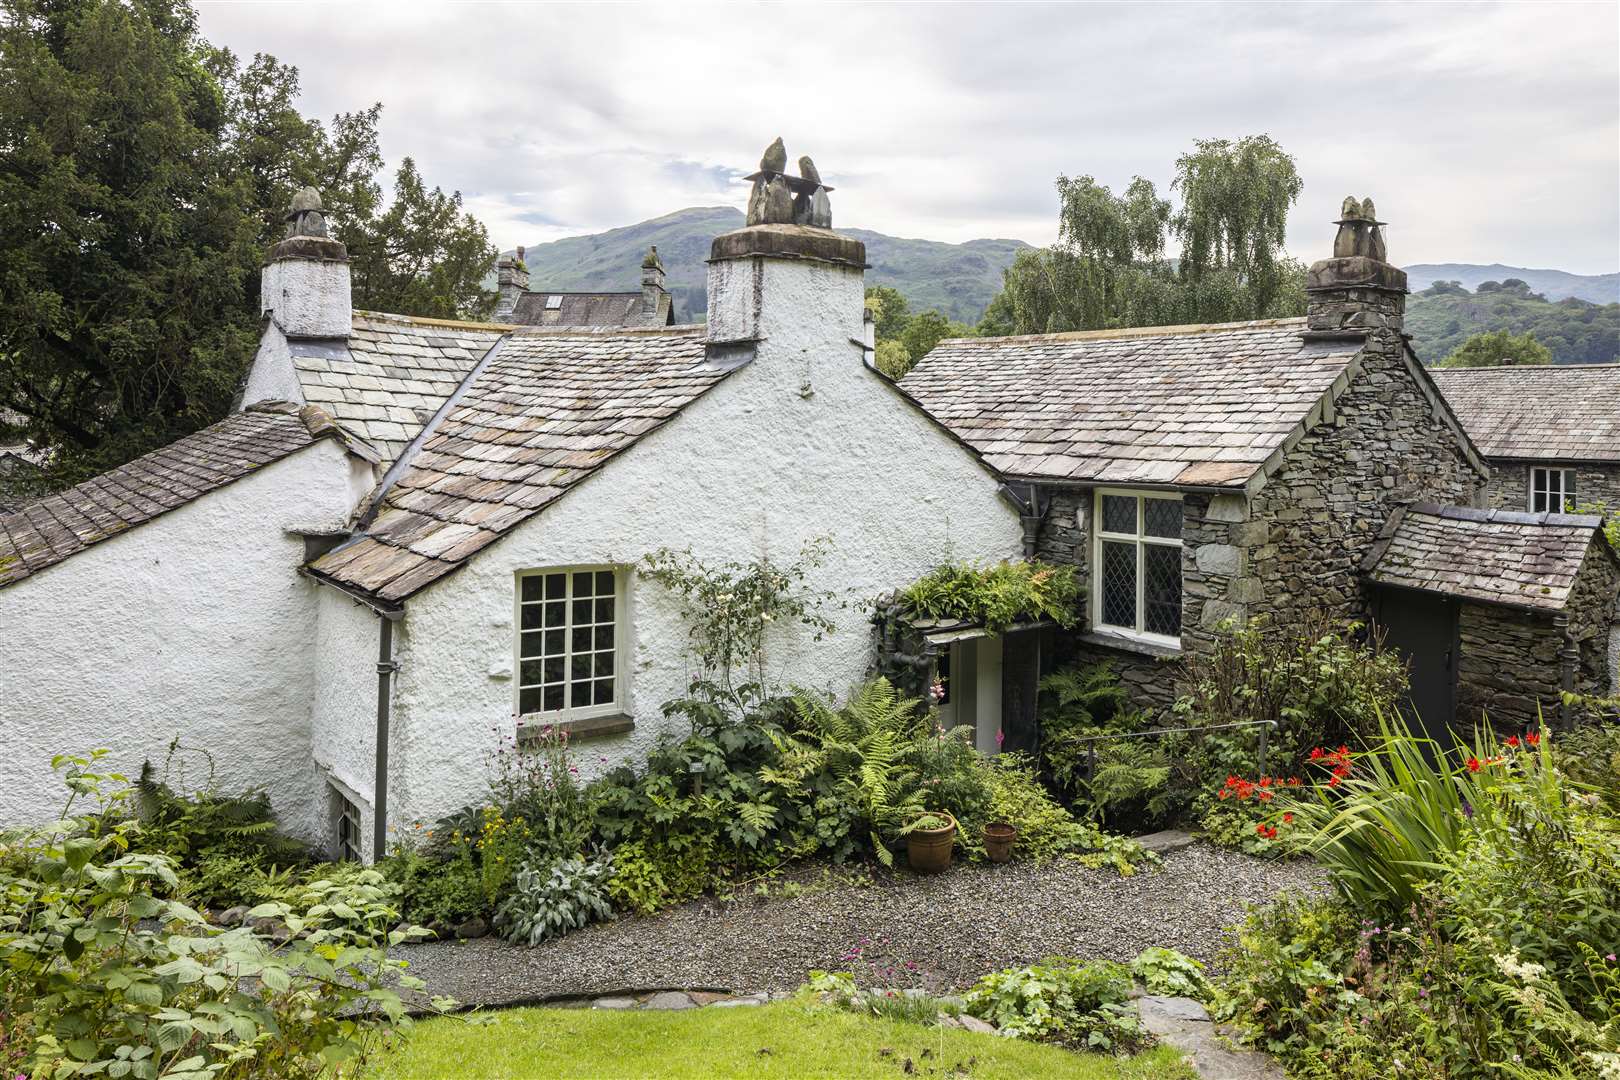 Dove Cottage was home to William Wordsworth and his sister Dorothy.